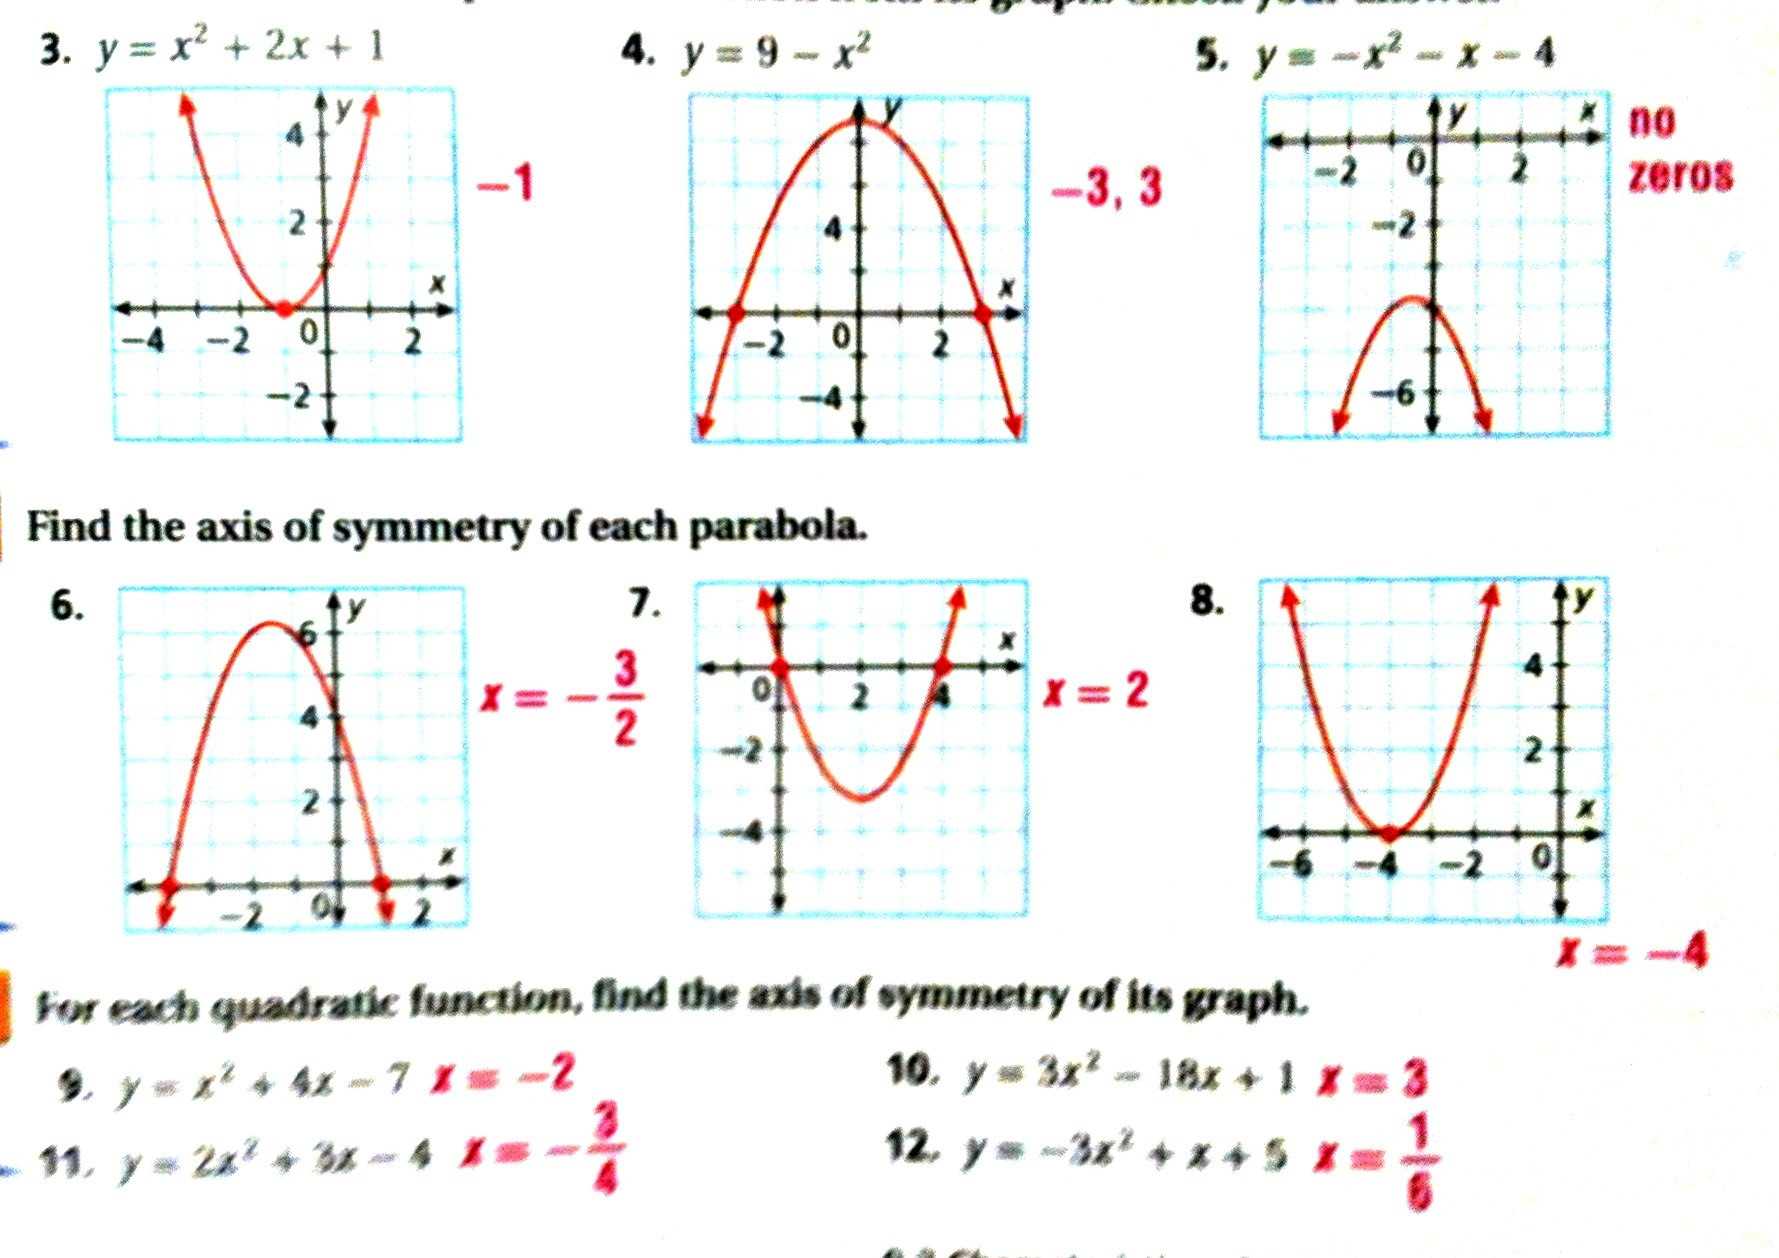 Piecewise Functions Worksheet 2 Also 19 New Graphing Rational Functions Worksheet Answers Stock